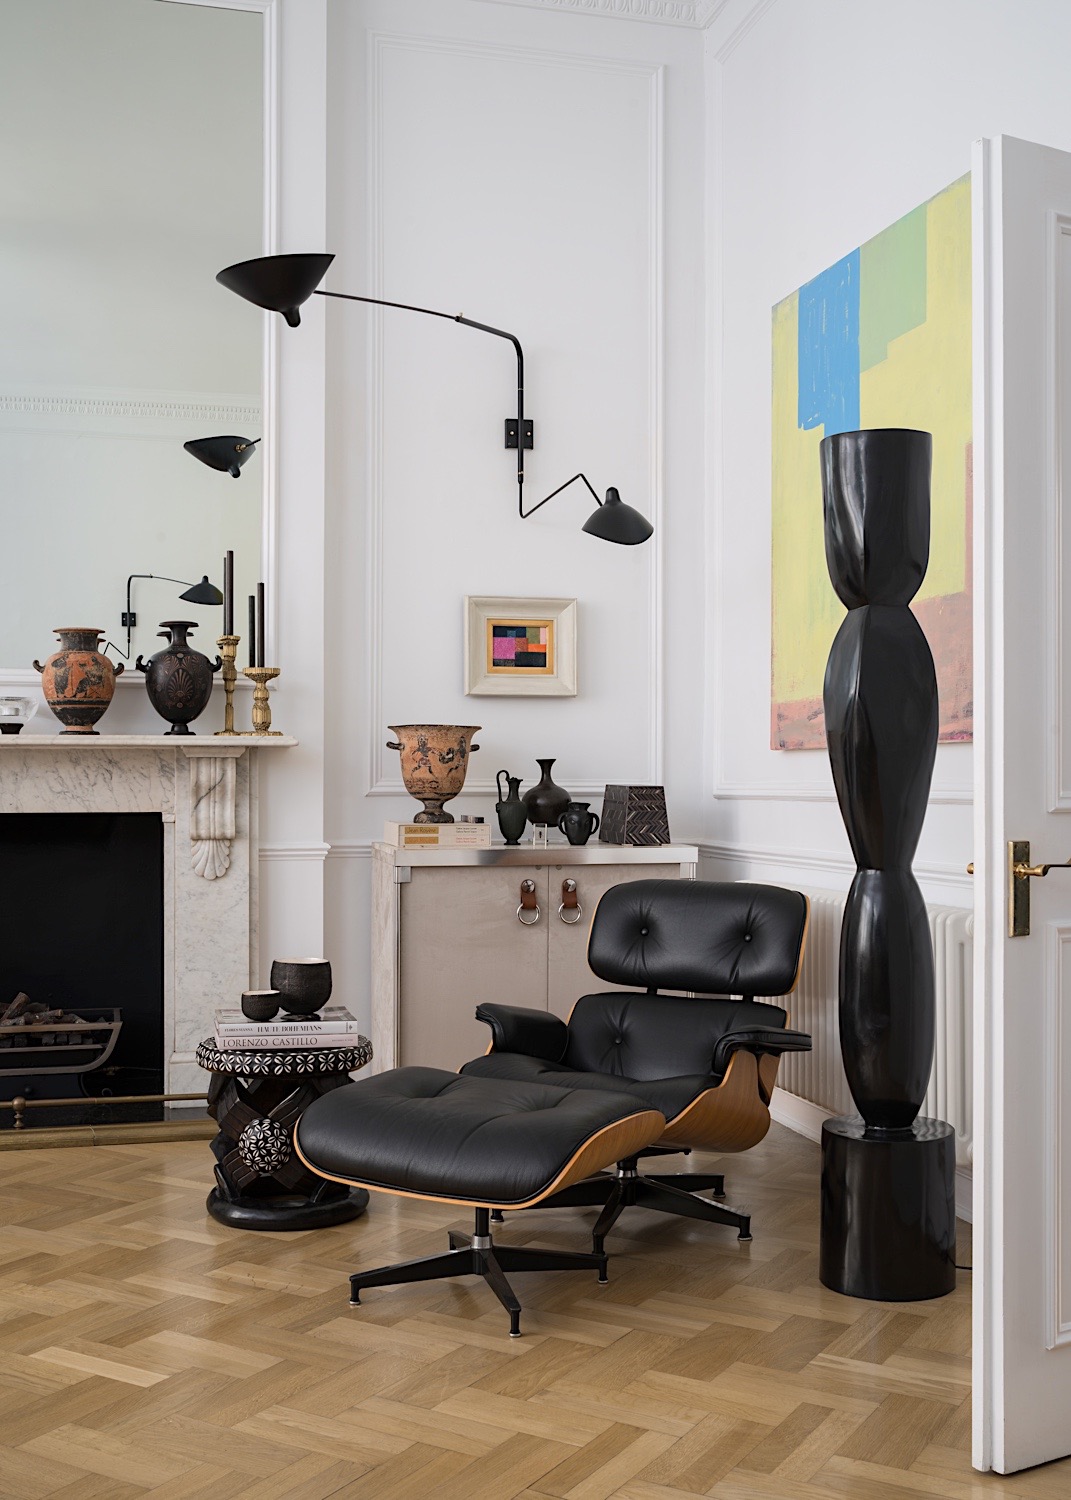  Eames chair &amp; ottoman, Tribal stool, Serge Mouille wall light, bronze torchere by Alexander Lamont. Painting by Joseph Goody. 